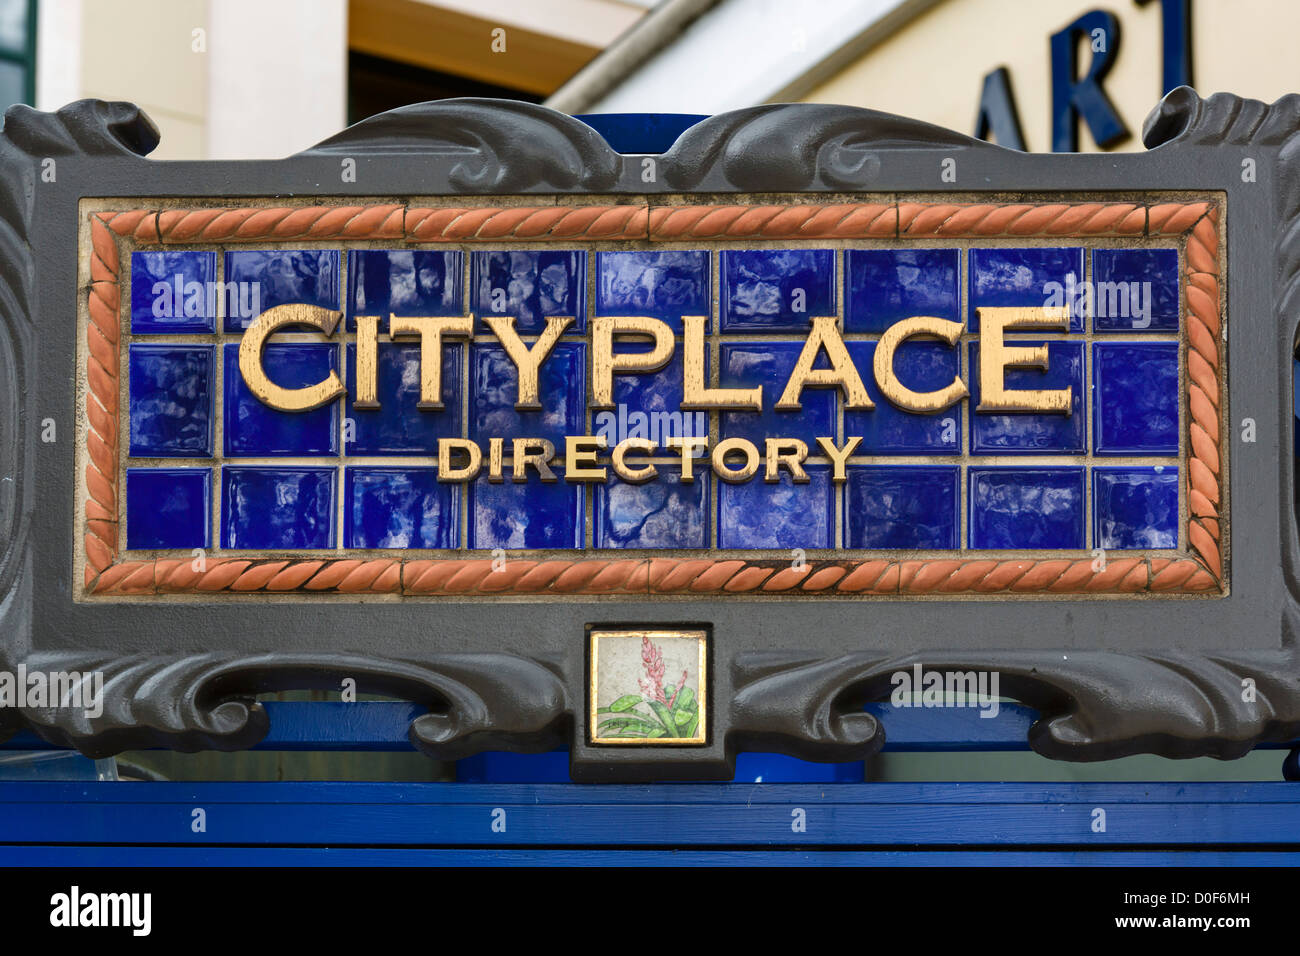 Directory sign for the Cityplace development, South Rosemary Avenue, West Palm Beach, Treasure Coast, Florida, USA Stock Photo